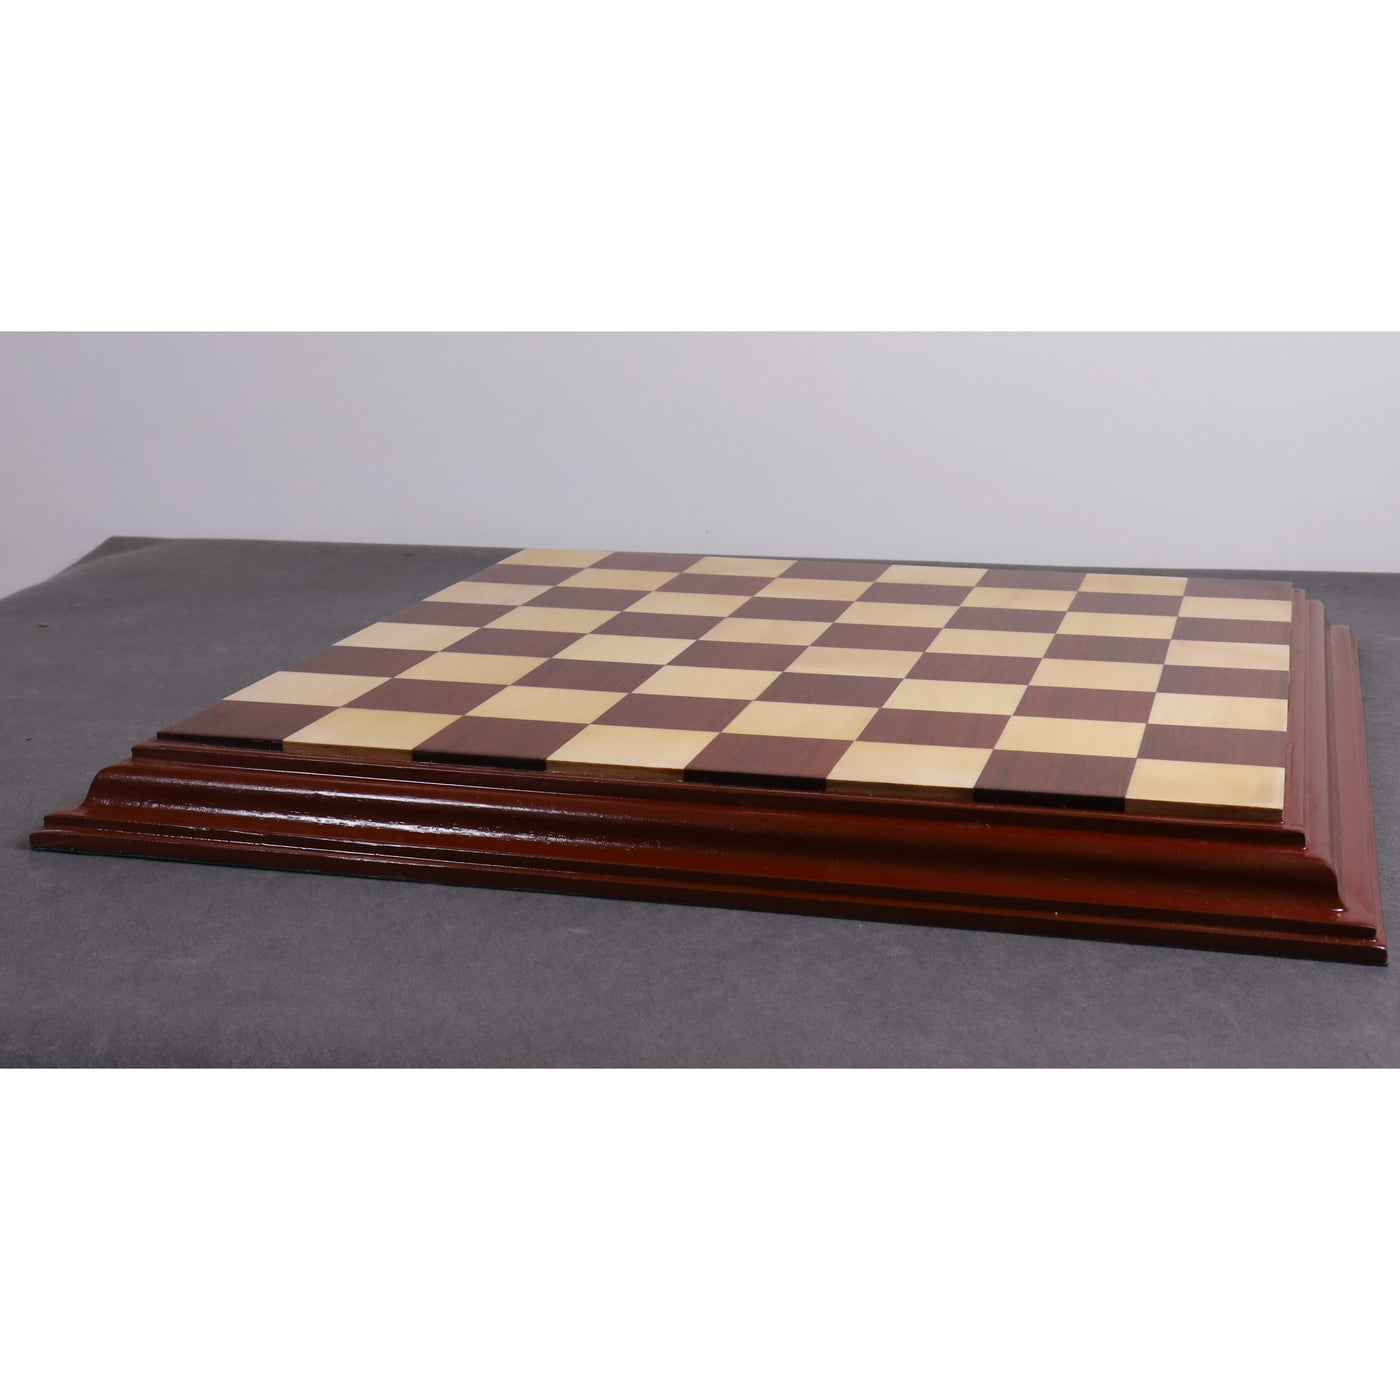 Bud Rosewood & Maple Wood Luxury Chessboard with Carved Border - Flat Chess Board